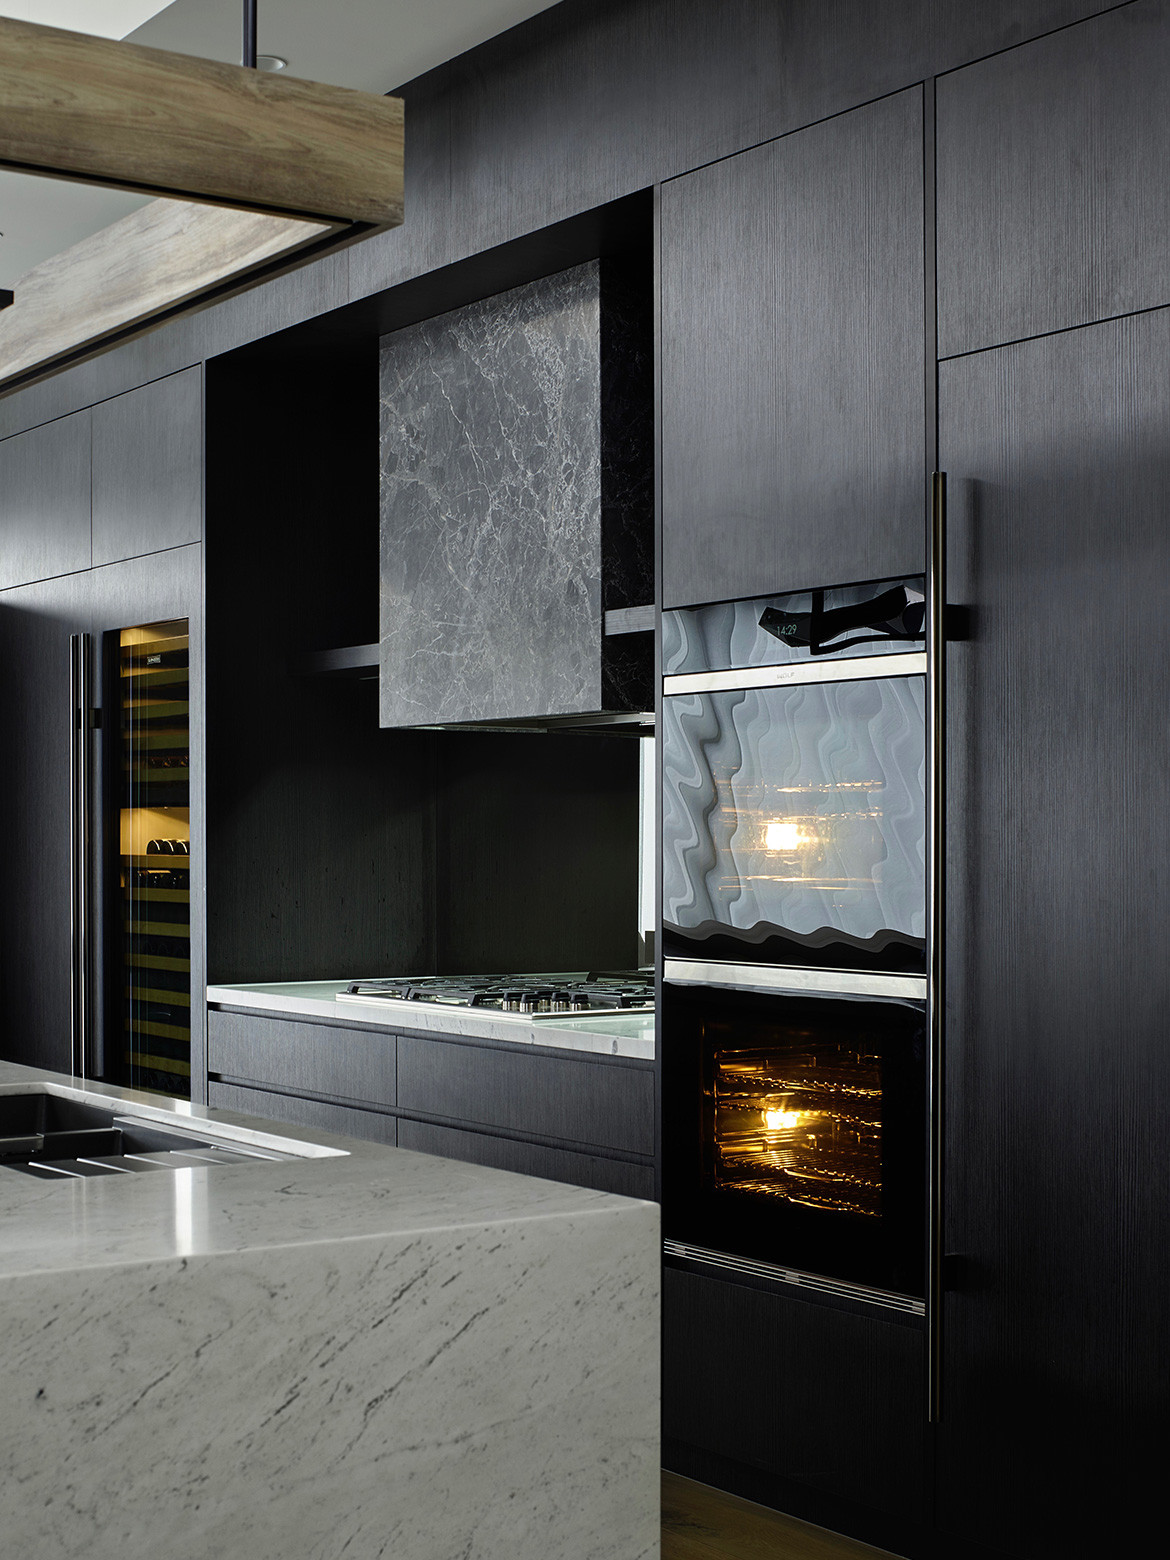 A Moody, Modern Kitchen Design By Maker + May   Habitus Living